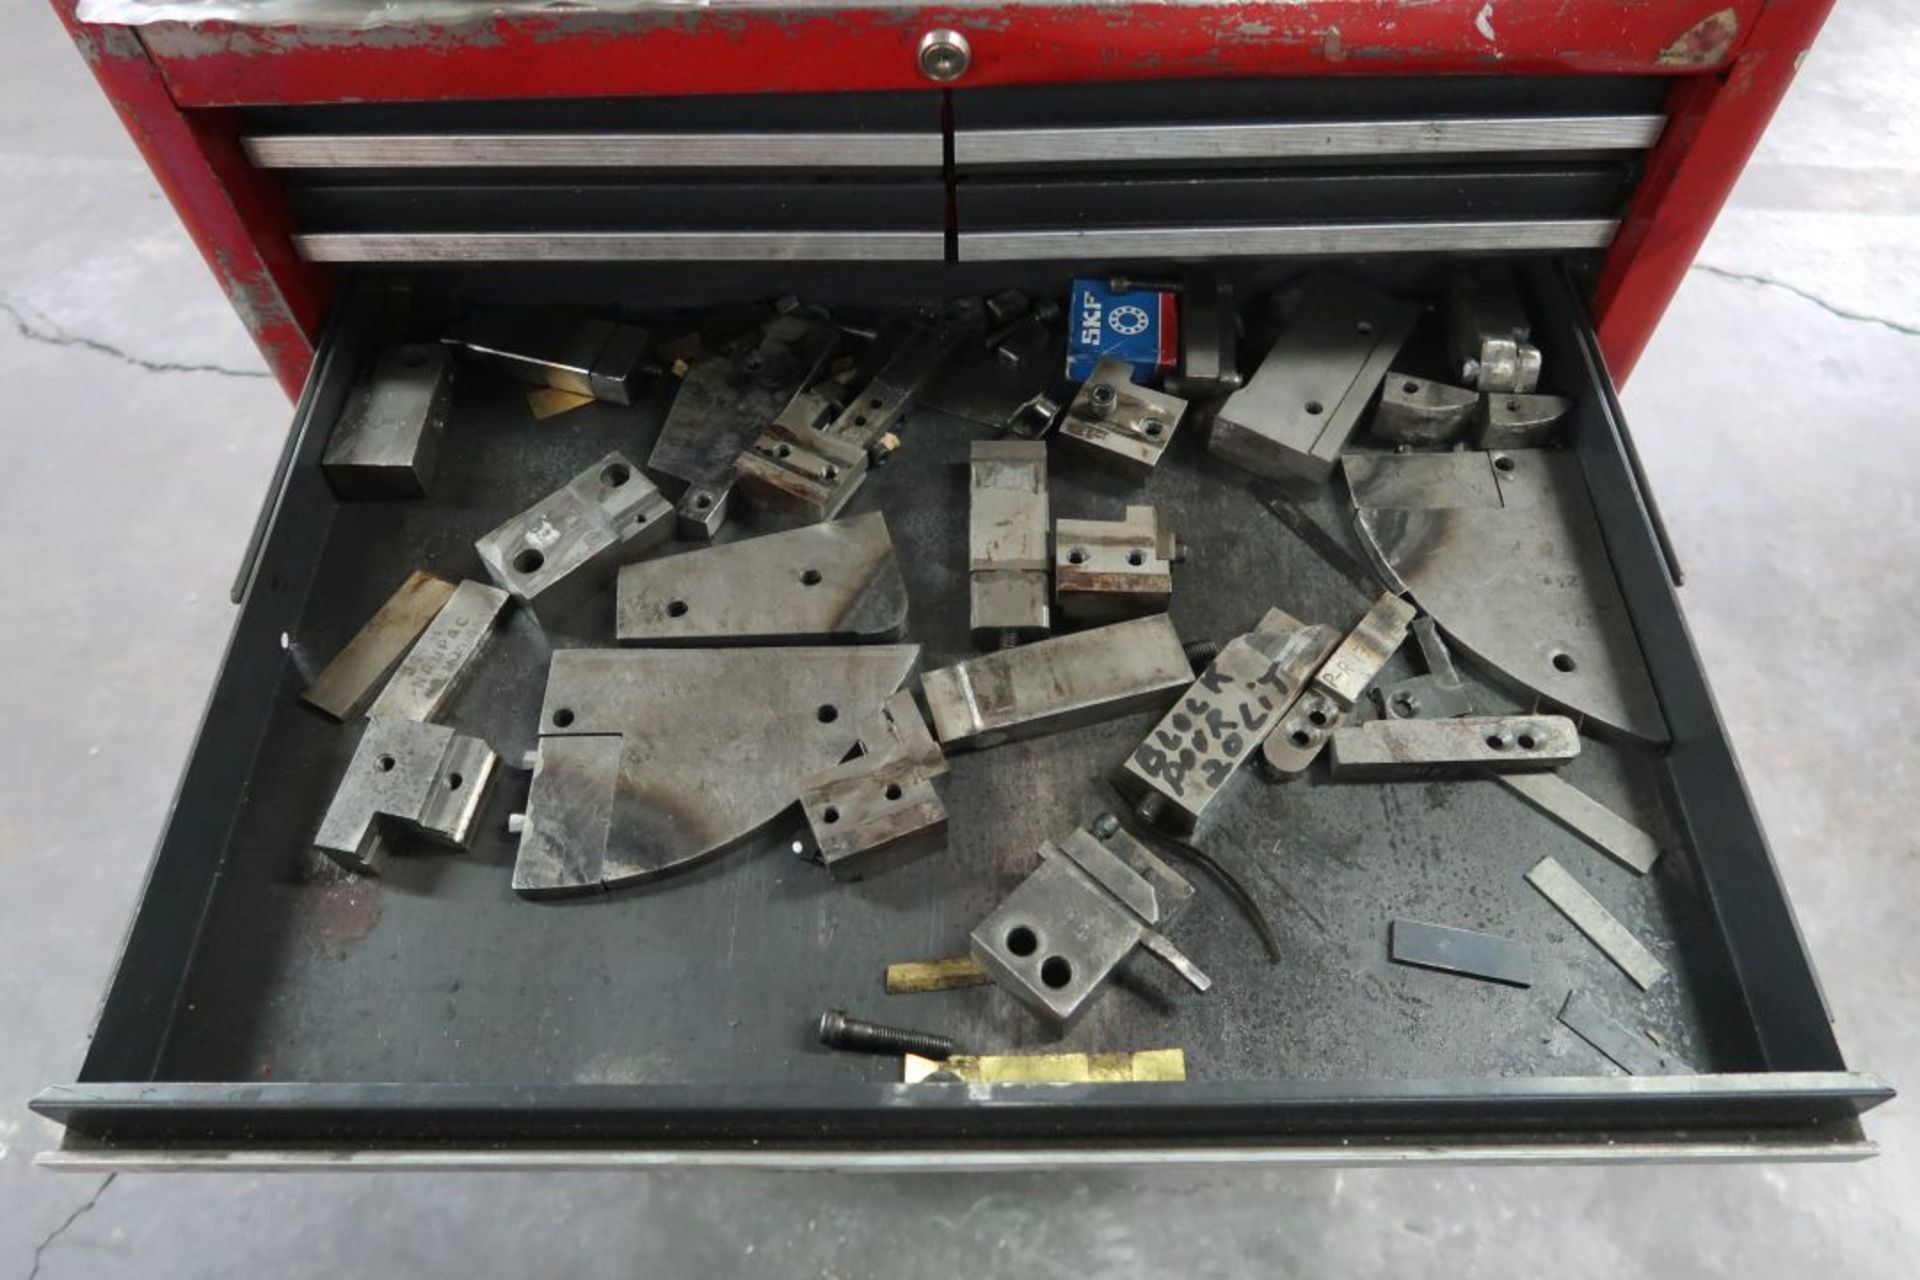 OMCG MULTI SLIDE 7 HEAD 3/16'' WIRE BENDER WITH PARTS FEEDER MOD: 630 S/N 1183 - Image 10 of 14